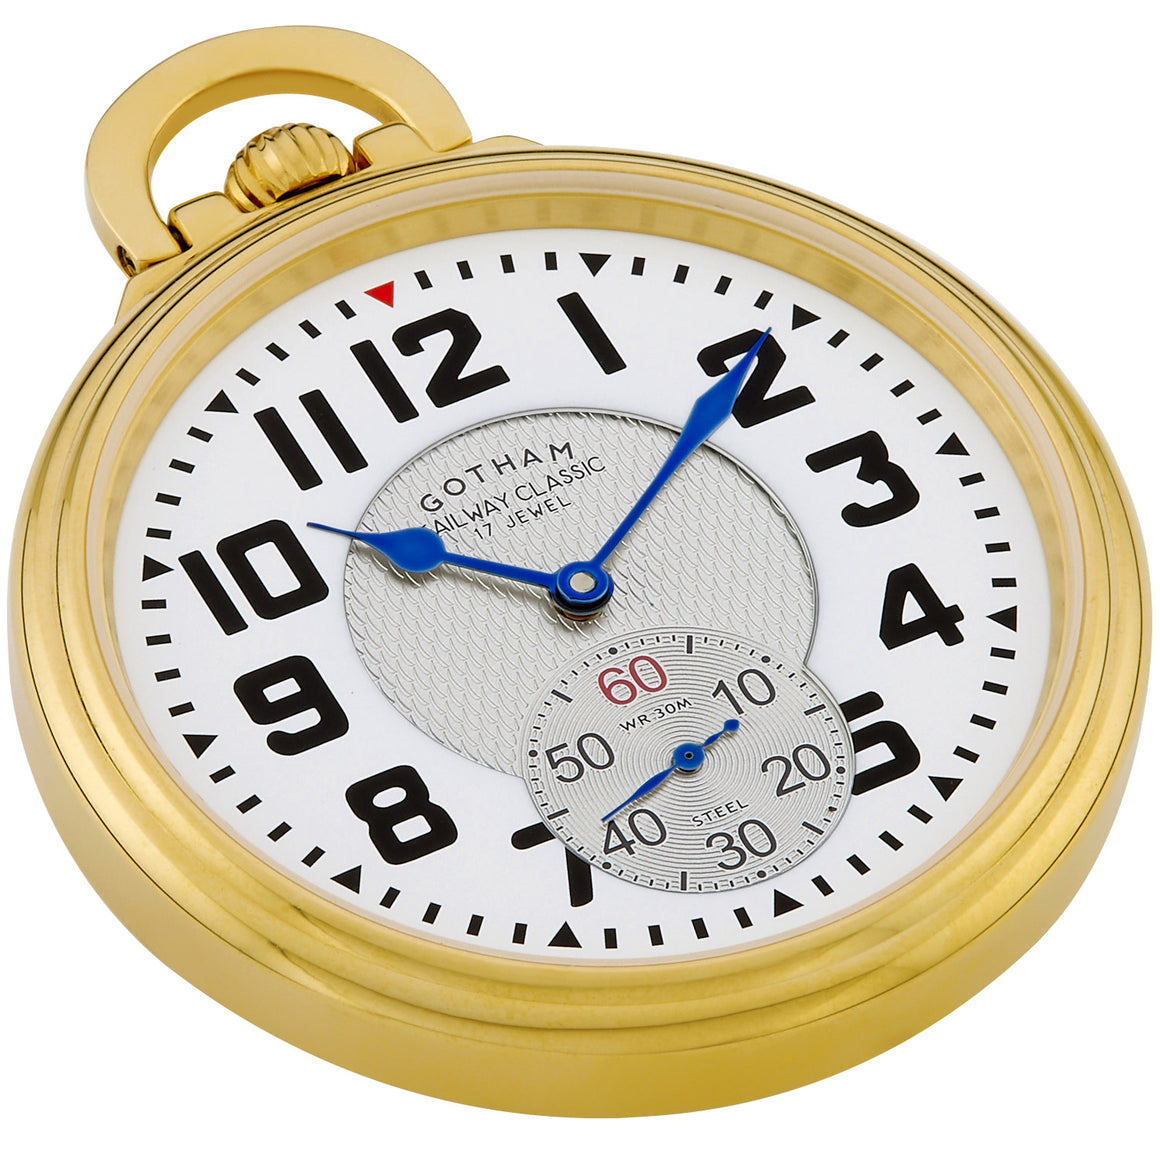 Gotham Men's Gold Plated Stainless Steel Mechanical Hand Wind Railway Classic Nostalgia Series Pocket Watch # GWC14115G